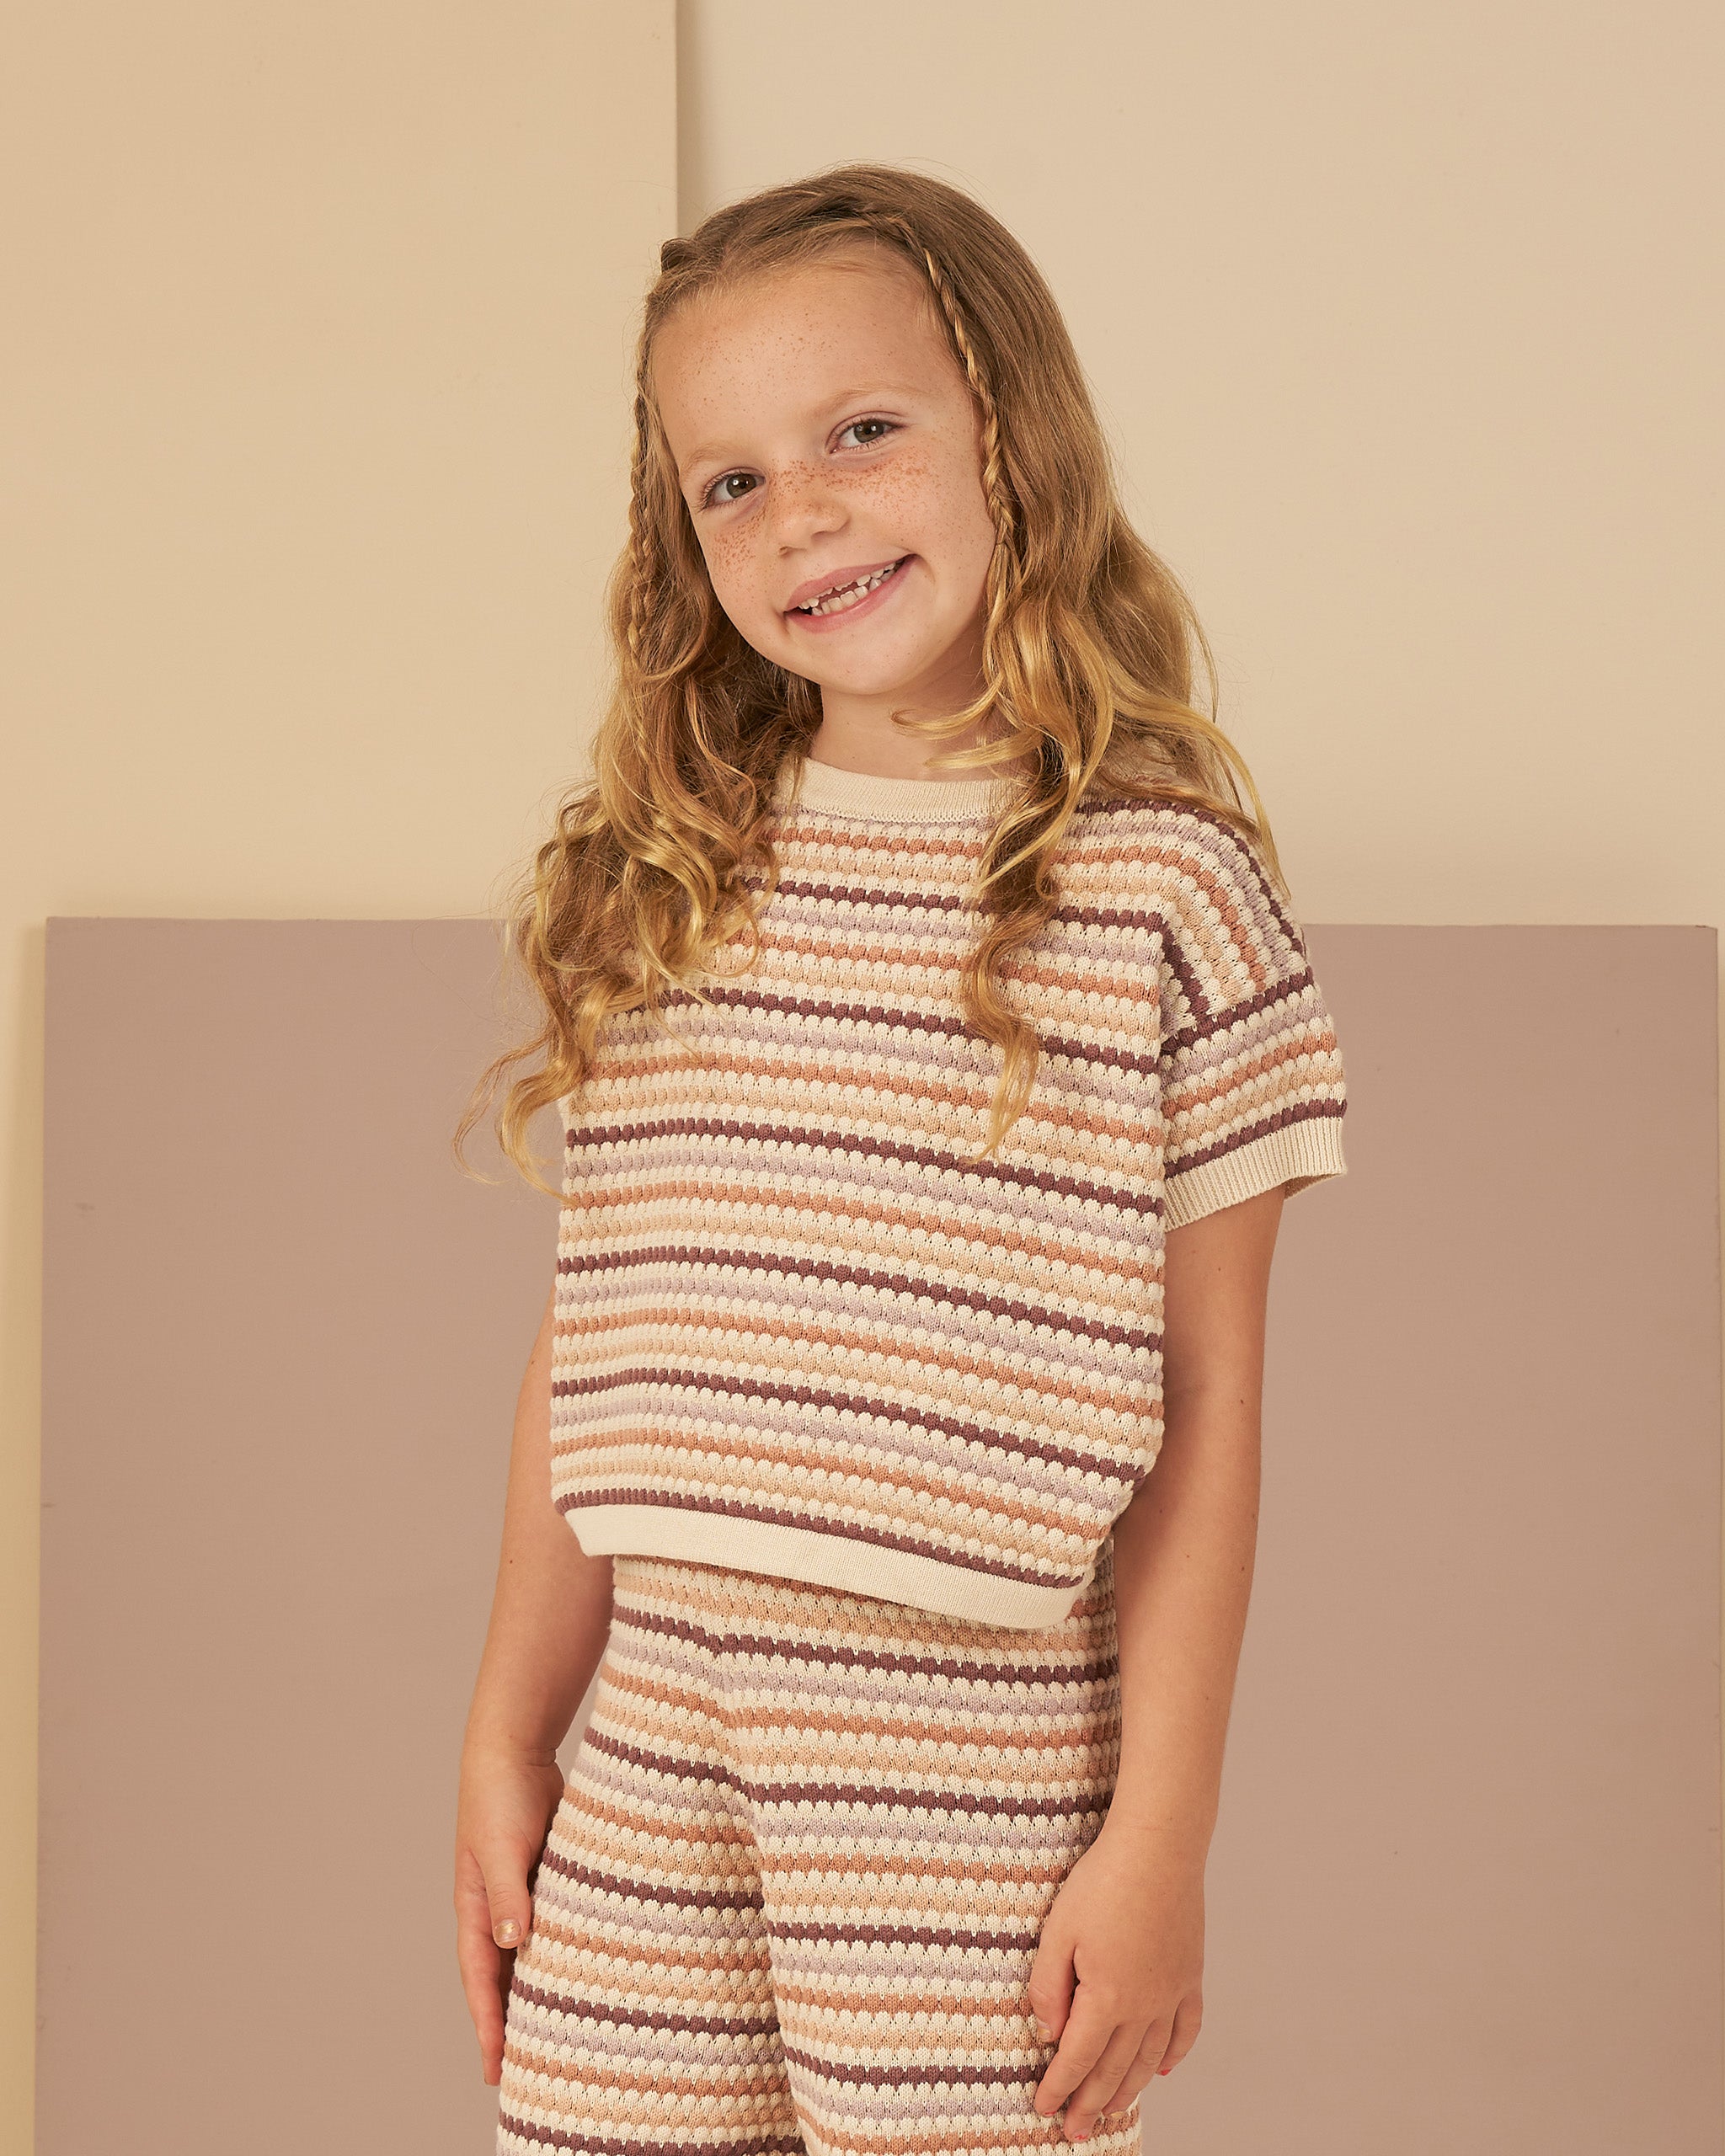 Boxy Crop Knit Tee || Honeycomb Stripe - Rylee + Cru | Kids Clothes | Trendy Baby Clothes | Modern Infant Outfits |